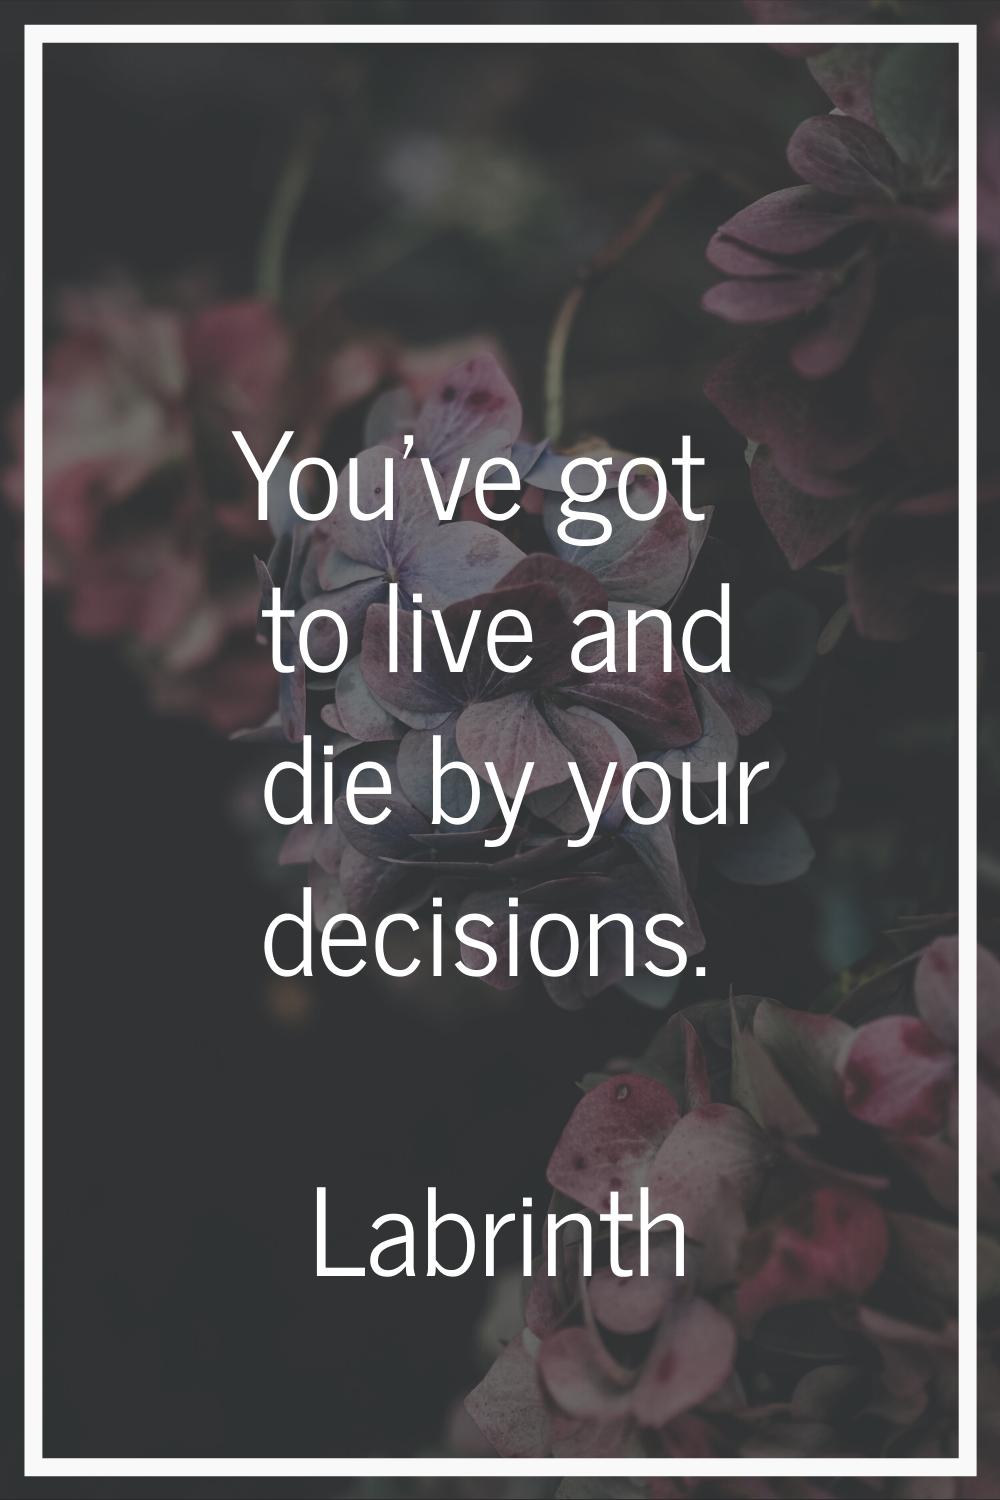 You've got to live and die by your decisions.